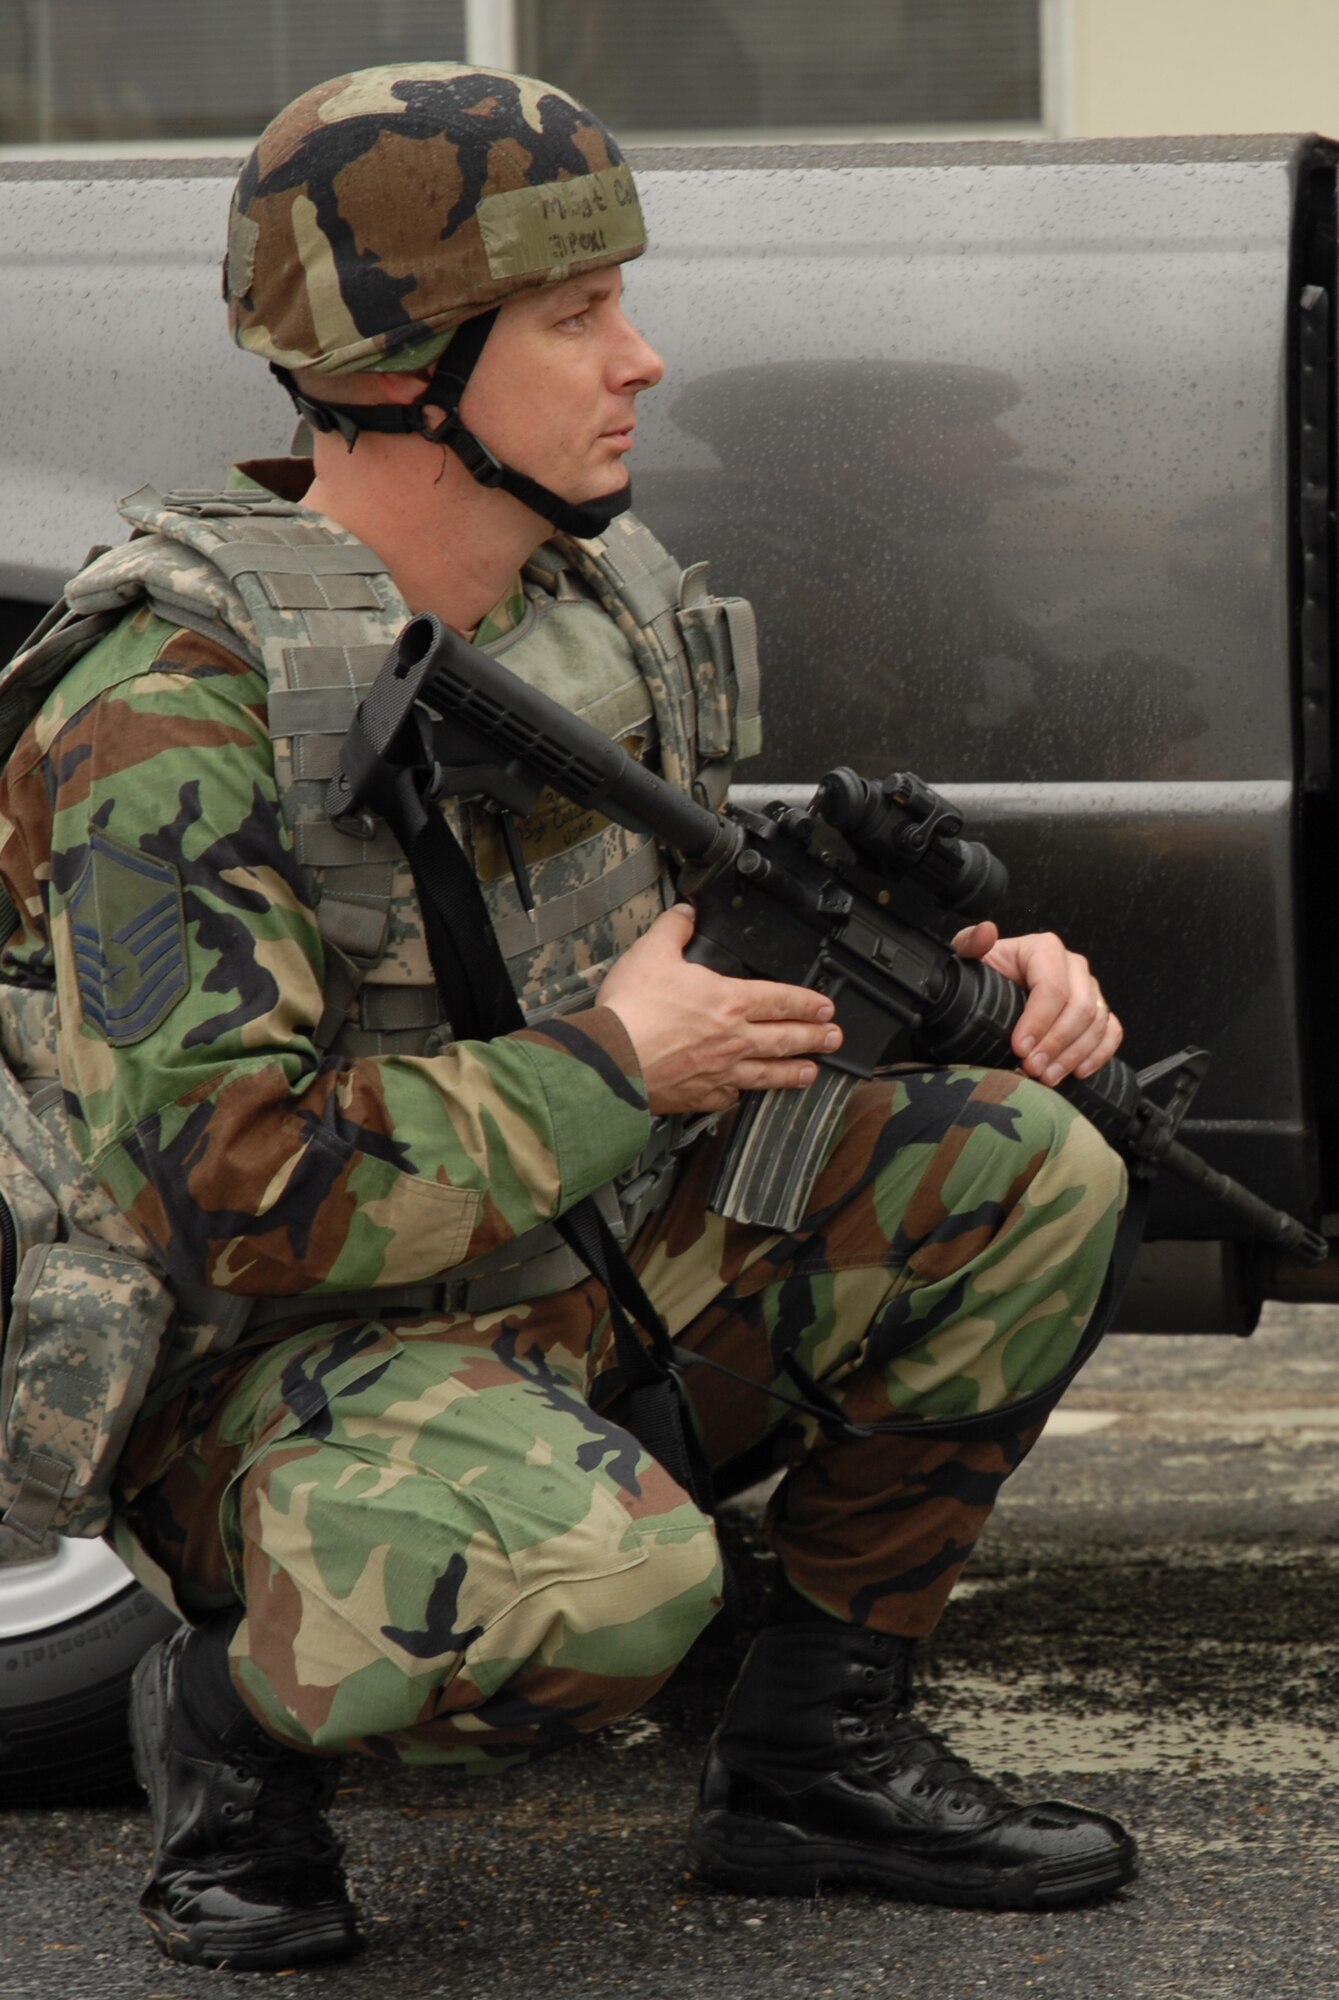 Master Sgt. Keith Collins, 18th Security Forces Squadron, takes shelter behind a vehicle during a hostile situation scenario at the comptroller squadron building, during the 2008 Pacific Air Forces Operational Readiness Inspection at Kadena Air Base, Japan, March 11, 2008. PACAF is conducting the inspection from March 9 to 15 to validate the mission readiness of the 18th Wing. (U.S. Air Force photo/Staff Sgt. Chrissy FitzGerald)